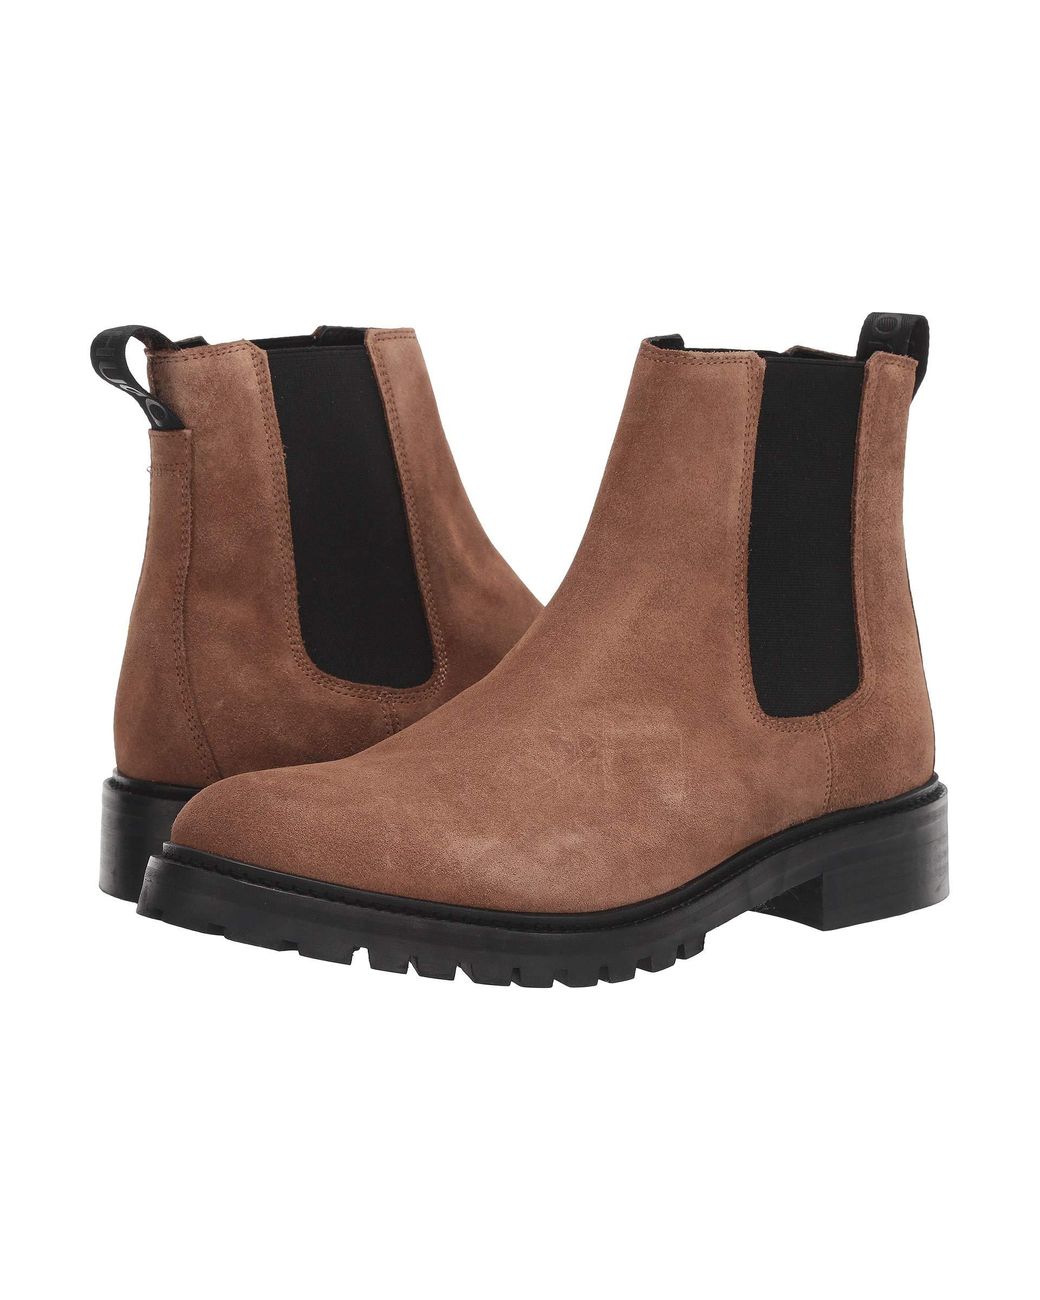 BOSS Suede Explore Chelsea Boots in Brown for Men - Lyst